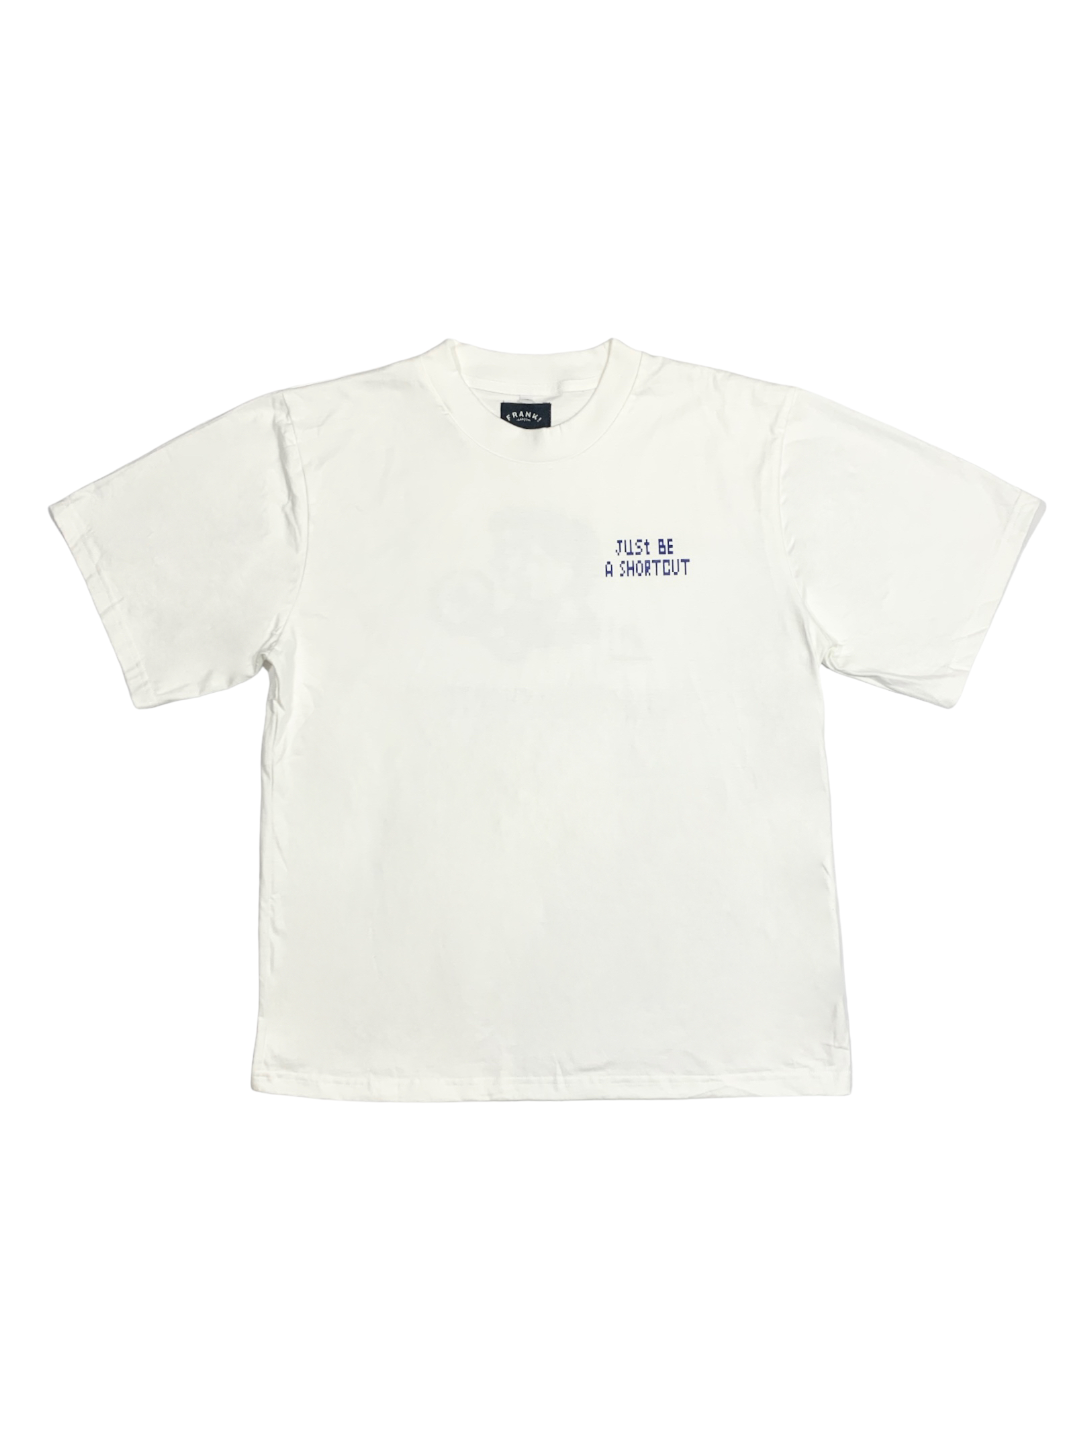 Just be a shortcut Tee (White)